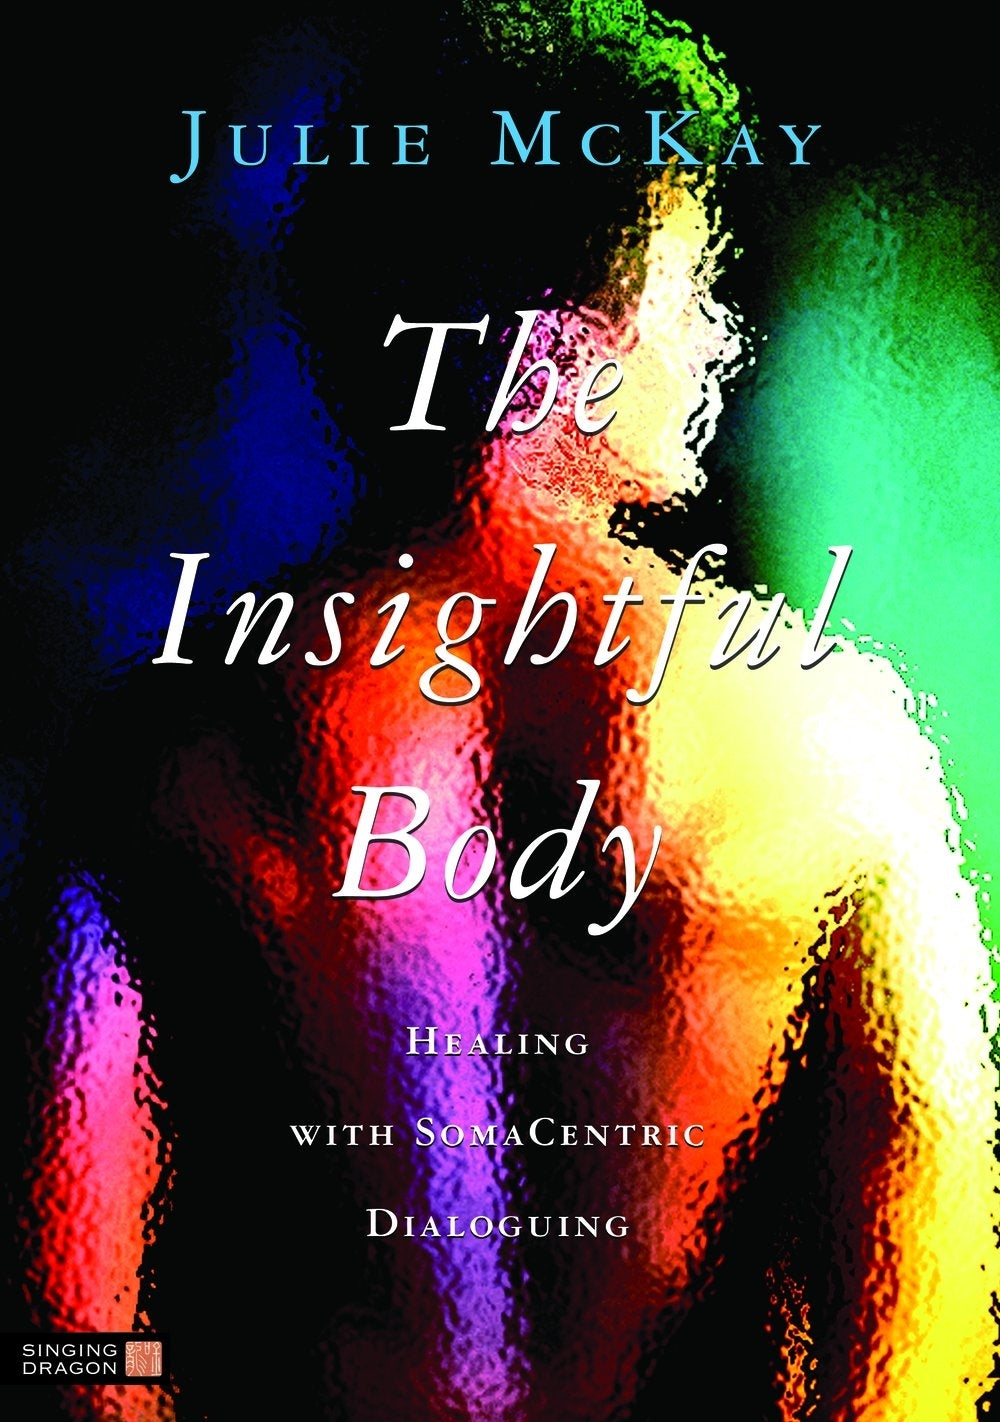 The Insightful Body by Julie McKay